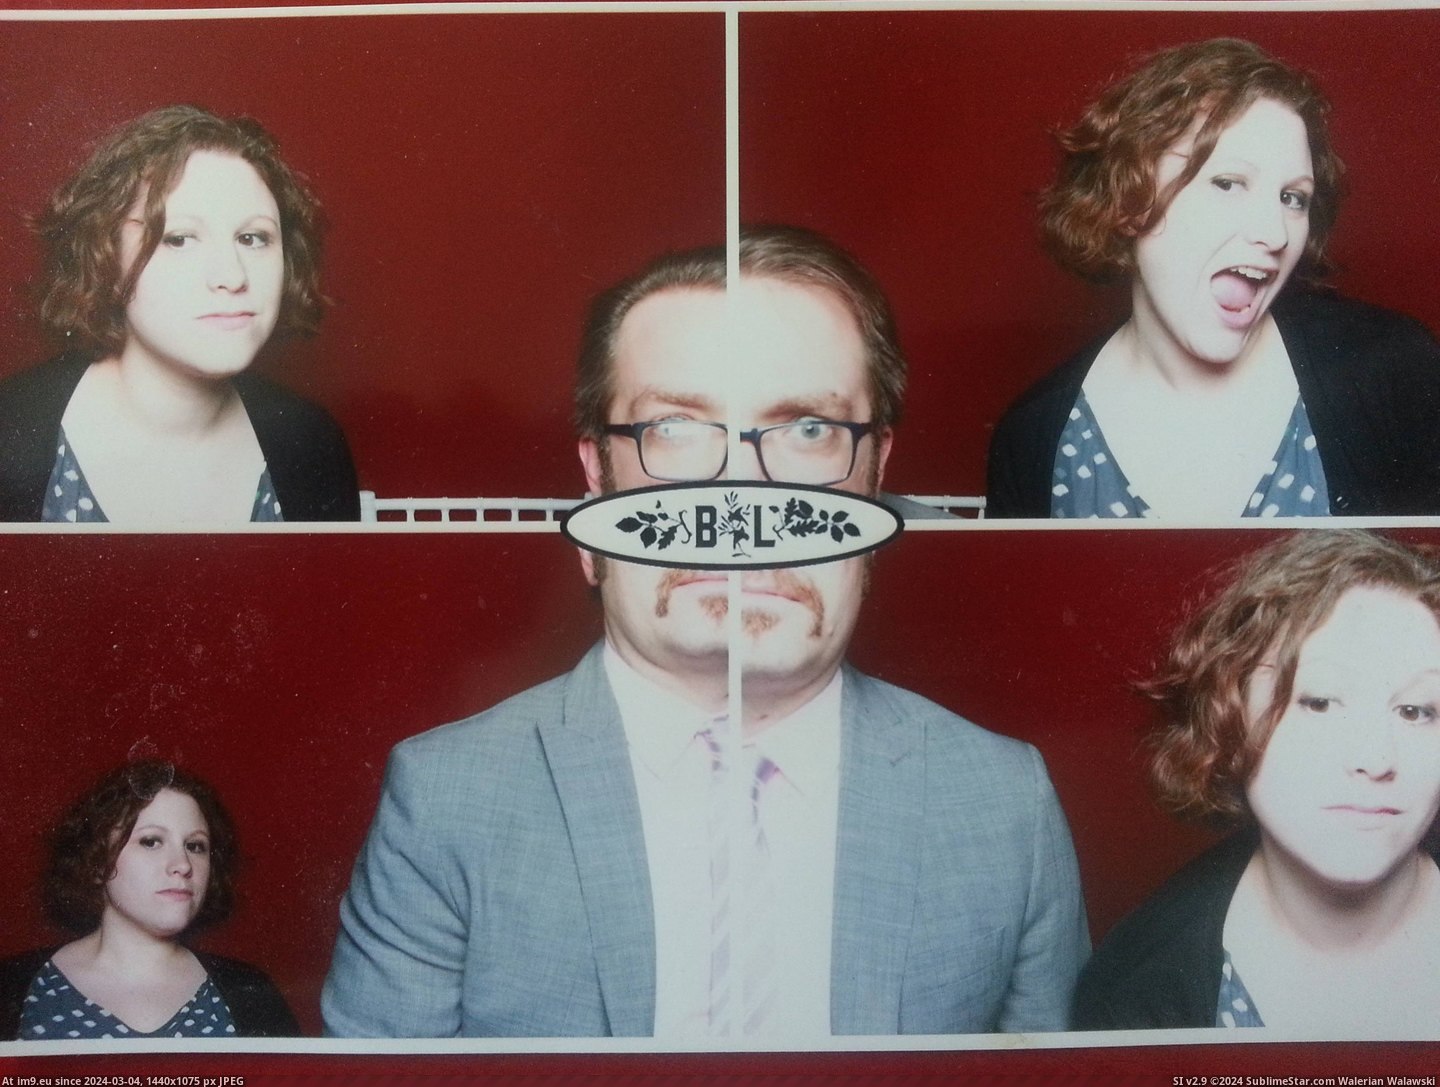 #Series #Wedding #Photobooth #Code #Cracked [Pics] There was a photobooth at a wedding that took a series of four. I cracked the code. Pic. (Obraz z album My r/PICS favs))